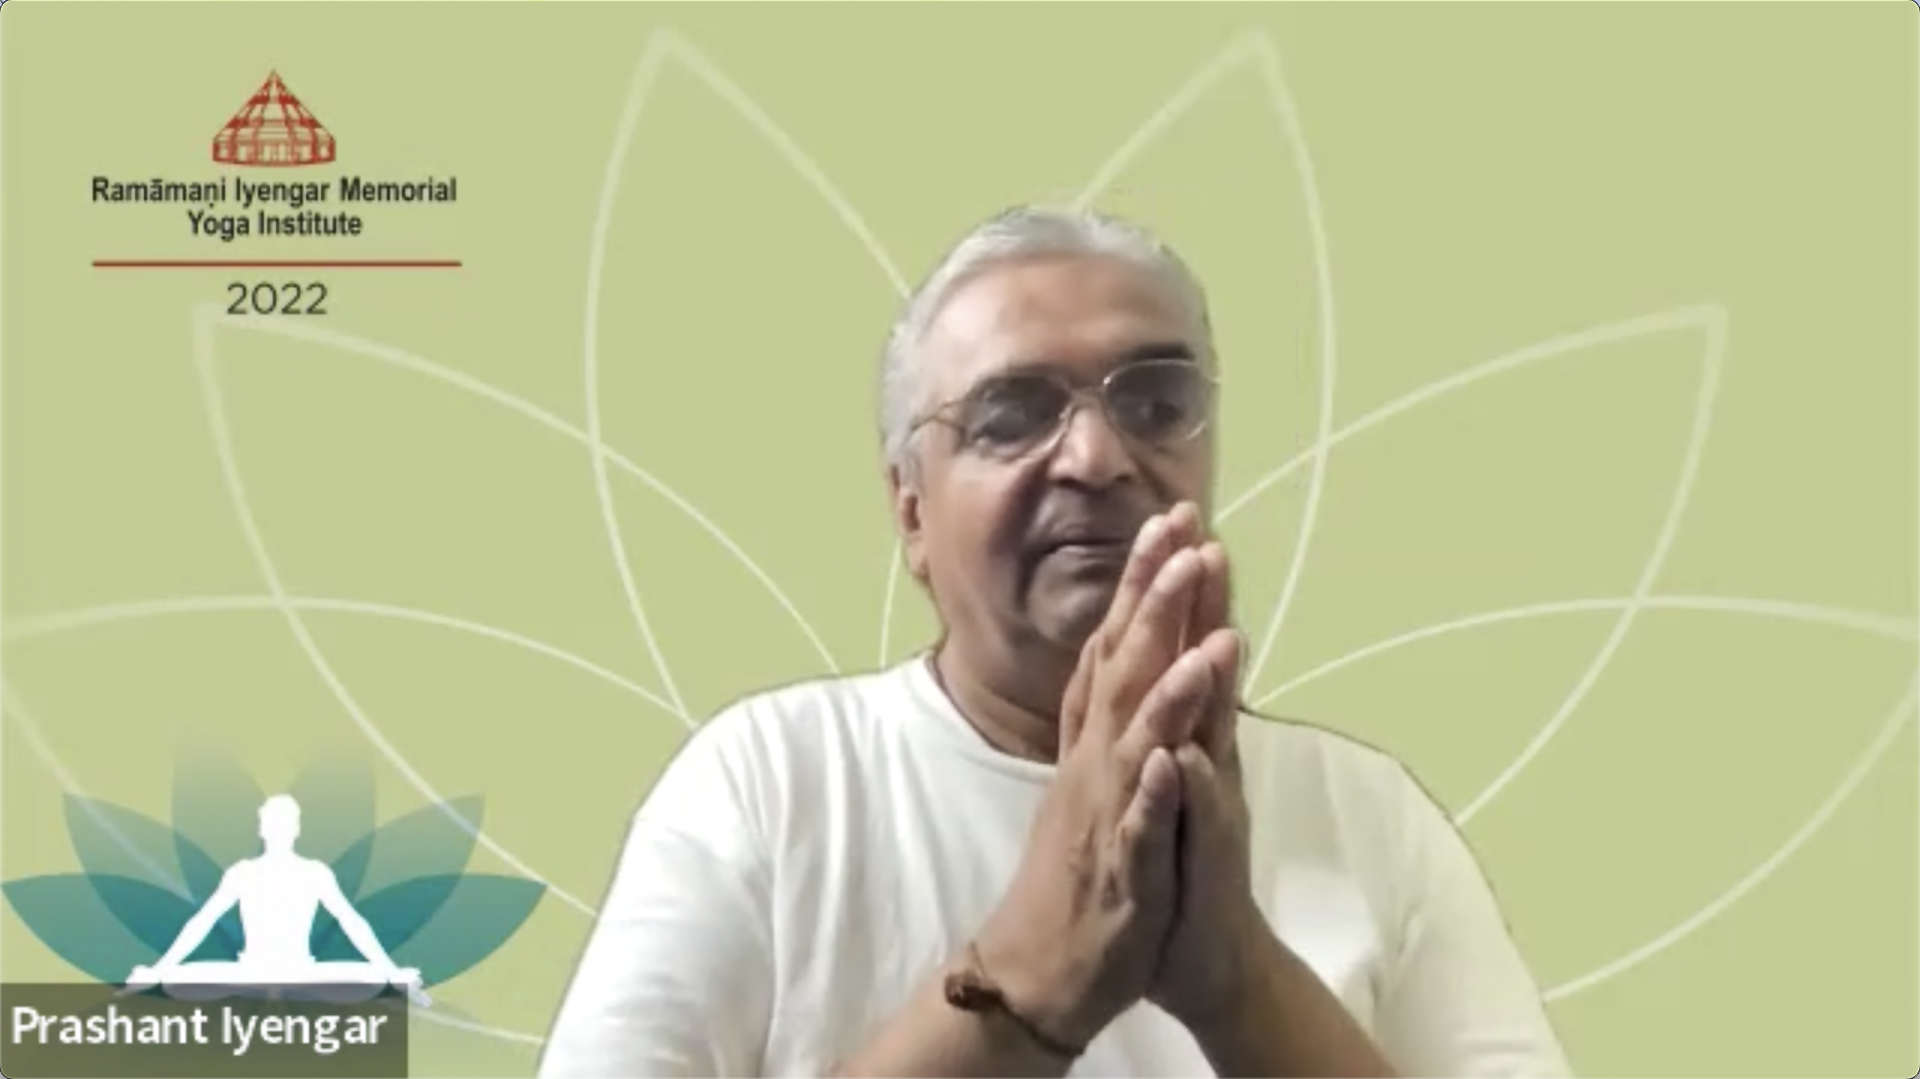 Interactive Sessions with Prashant Iyengar on the Philosophy of Teaching Yoga